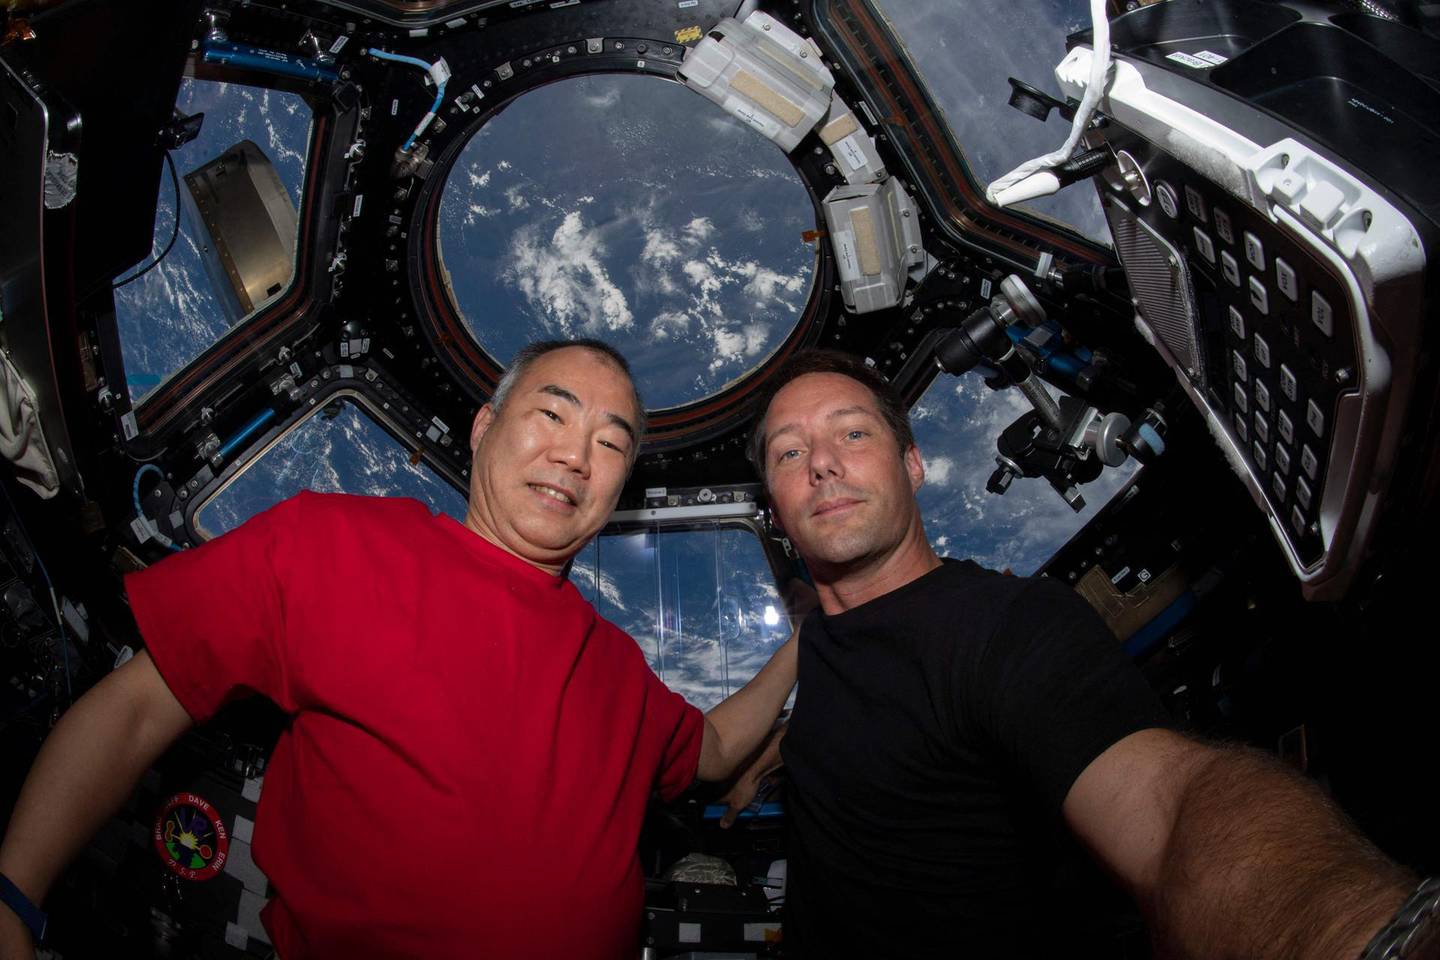 TOPSHOT - This NASA handout photo obtained May 2, 2021 shows Expedition 65 Flight Engineers Soichi Wakata(L) of the Japan Aerospace Exploration Agency and Thomas Pesquet of the European Space Agency as they pose on April 28, 2021 for a portrait inside the cupola, the International Space Station's "window to the world." RESTRICTED TO EDITORIAL USE - MANDATORY CREDIT "AFP PHOTO /NASA/HANDOUT " - NO MARKETING - NO ADVERTISING CAMPAIGNS - DISTRIBUTED AS A SERVICE TO CLIENTS
 / AFP / NASA / Handout / RESTRICTED TO EDITORIAL USE - MANDATORY CREDIT "AFP PHOTO /NASA/HANDOUT " - NO MARKETING - NO ADVERTISING CAMPAIGNS - DISTRIBUTED AS A SERVICE TO CLIENTS
